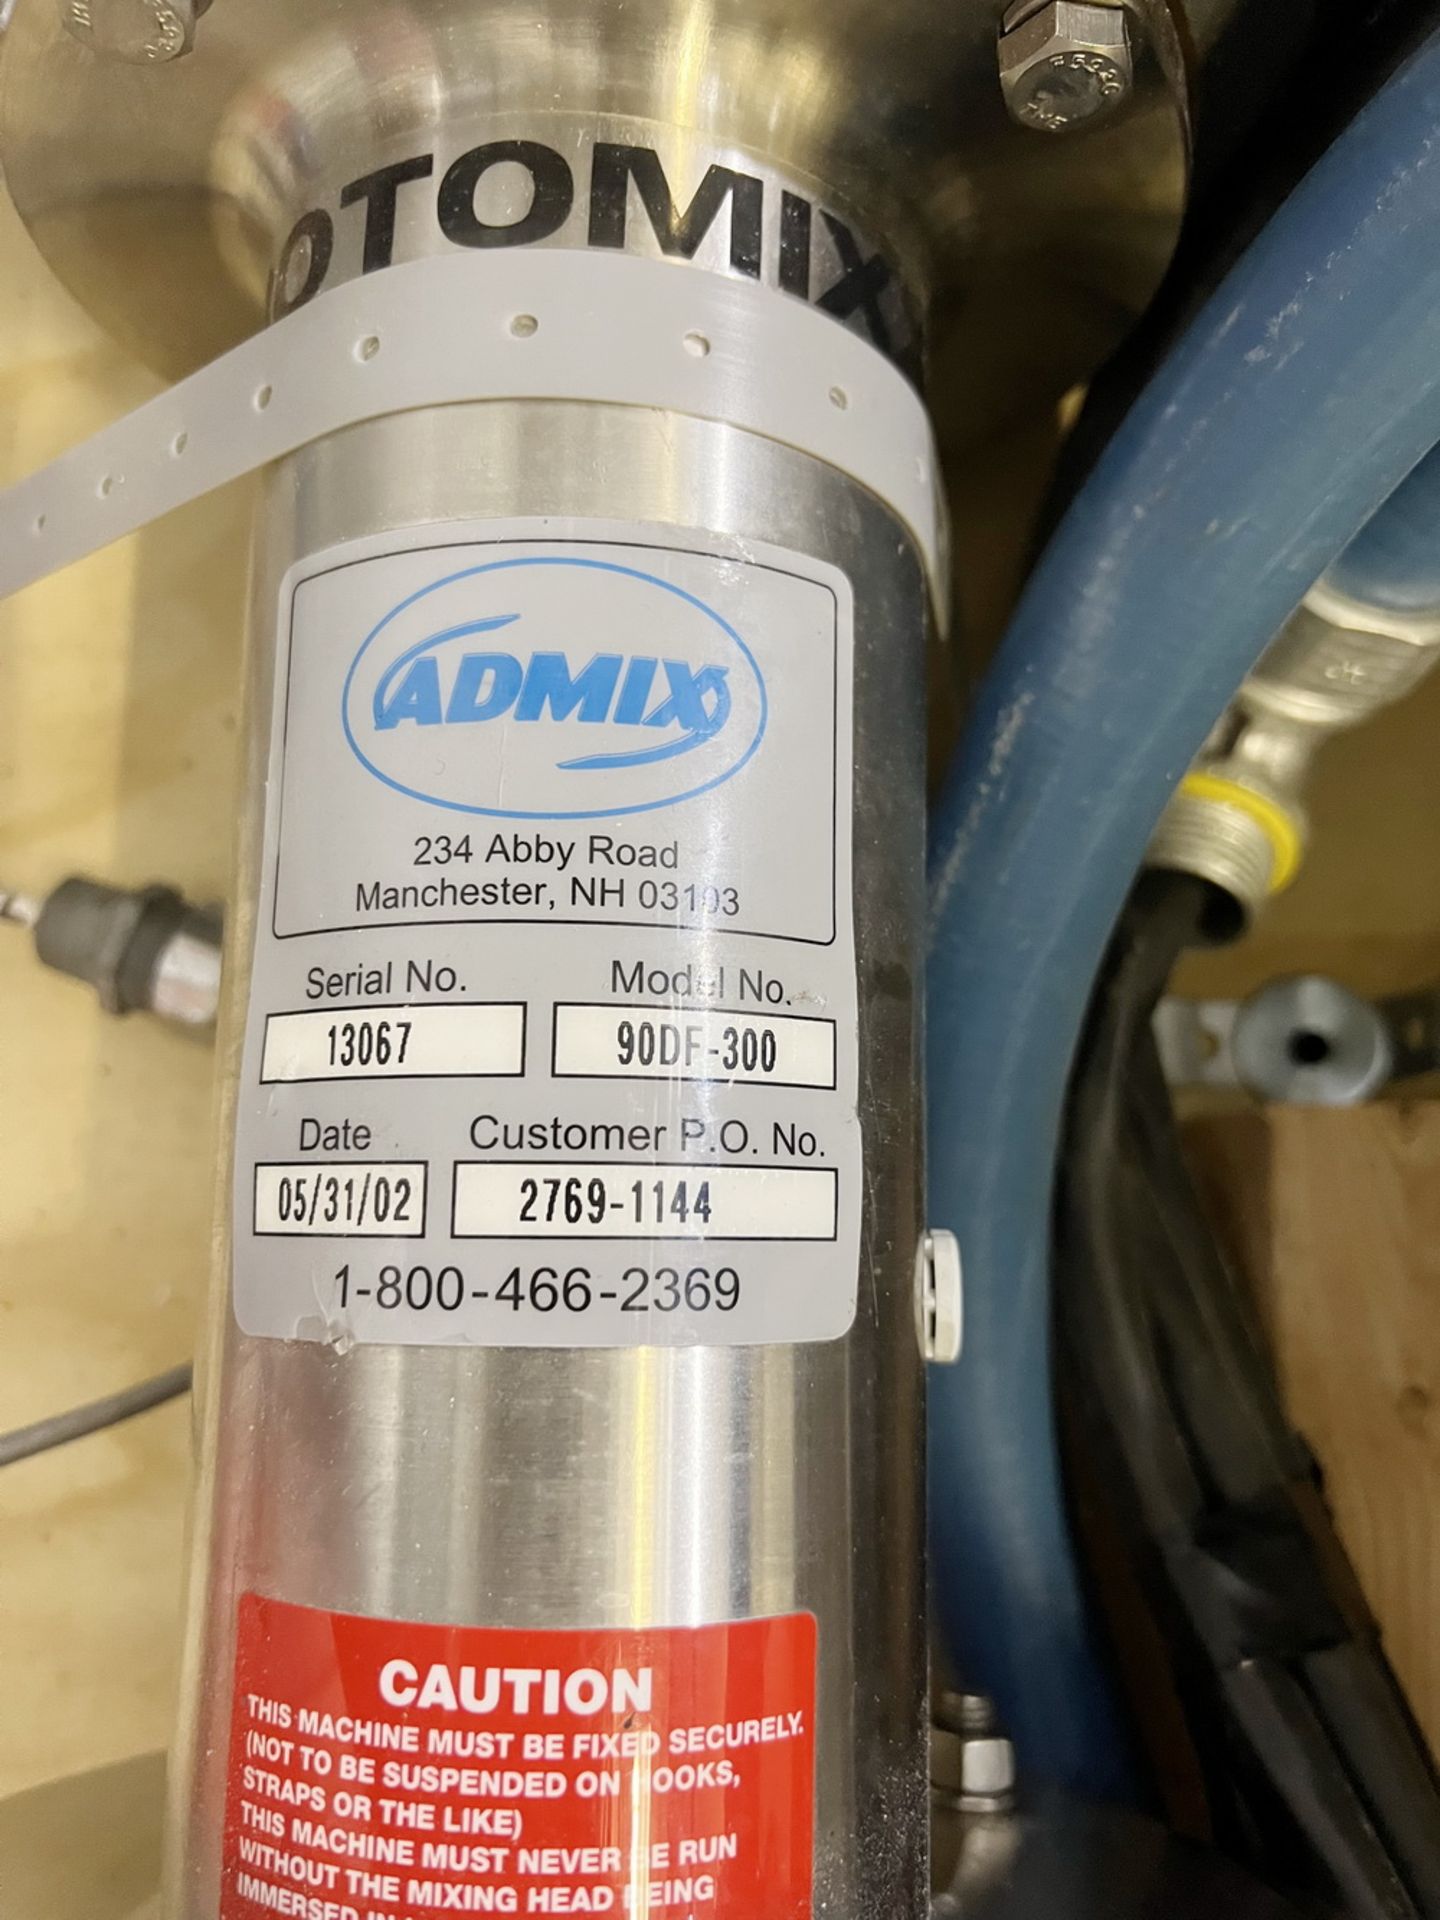 Hicks/Admix 60 gallon Stainless Steel Jacketed Vacuum Anchor Scraper Mixing Tank, NB# 321 - Image 21 of 29